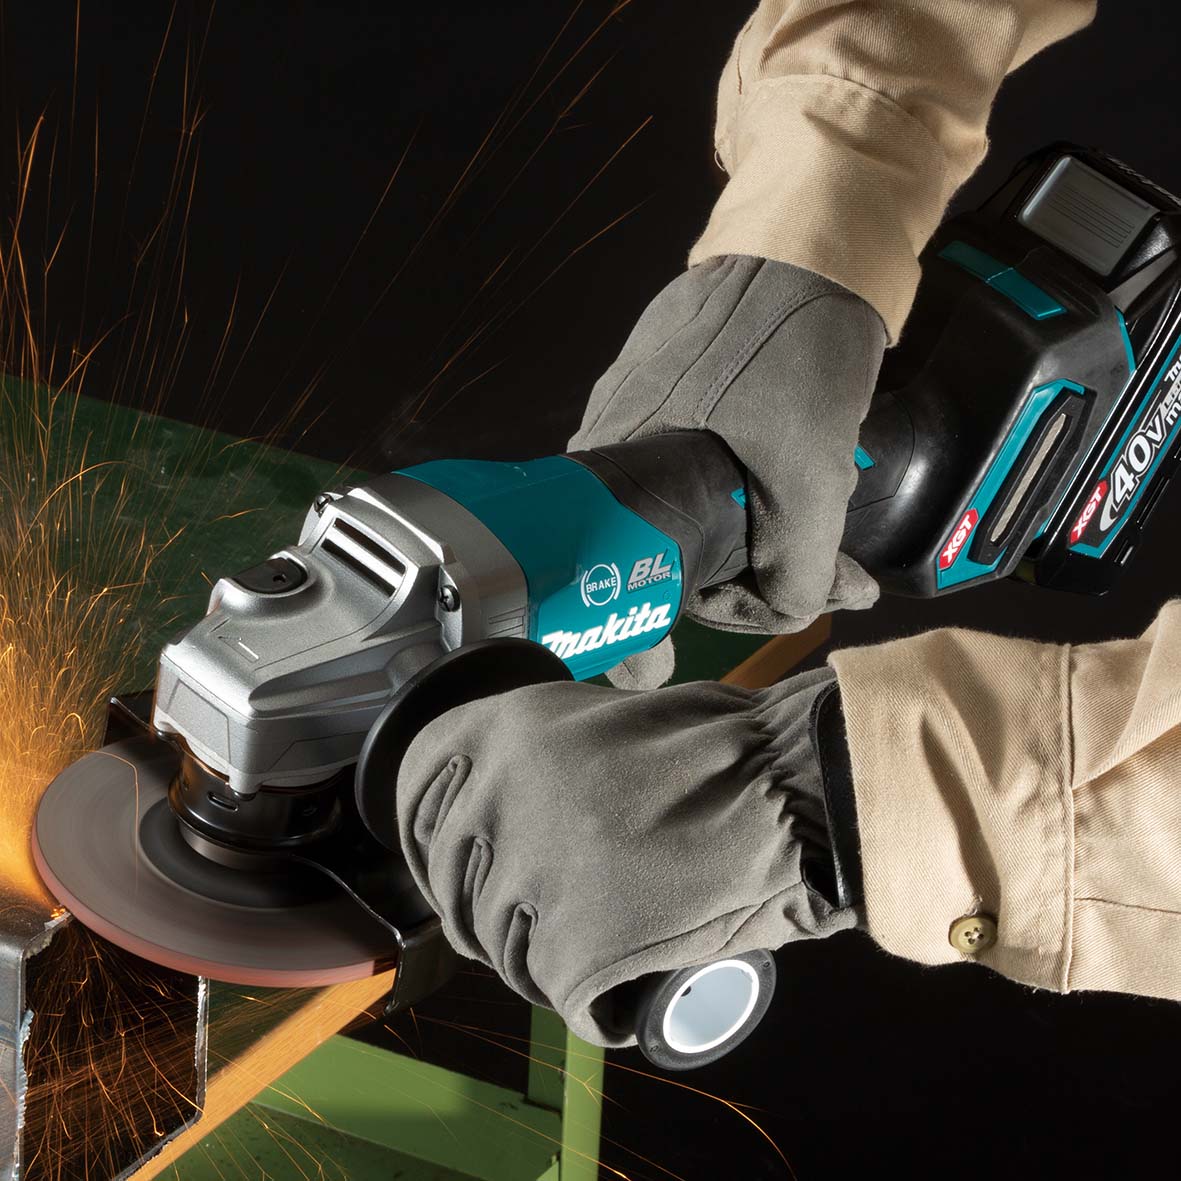 40V 125mm (5") Brushless Paddle Switch Angle Grinder Bare (Tool Only) GA013GZ by Makita